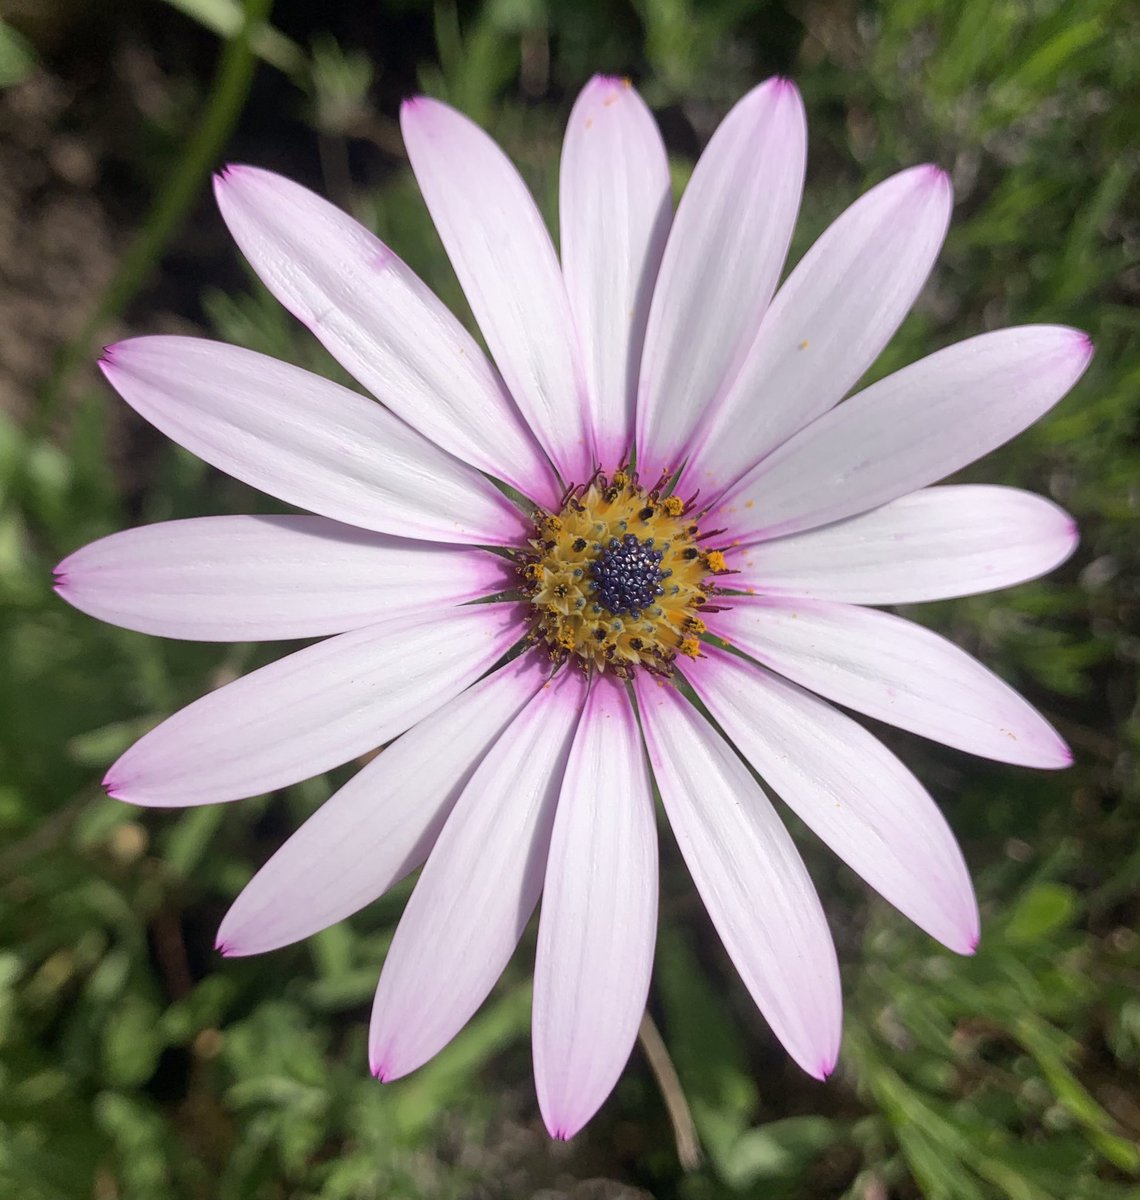 #Diurnal daisy Tell me what you see When you close your petals And go to sleep Do you dream of flirting With bees and butterflies Or yearn for the sun To peep through cloudy skies If you fear the dark I will be your light Open your fragile heart To me. #vss365